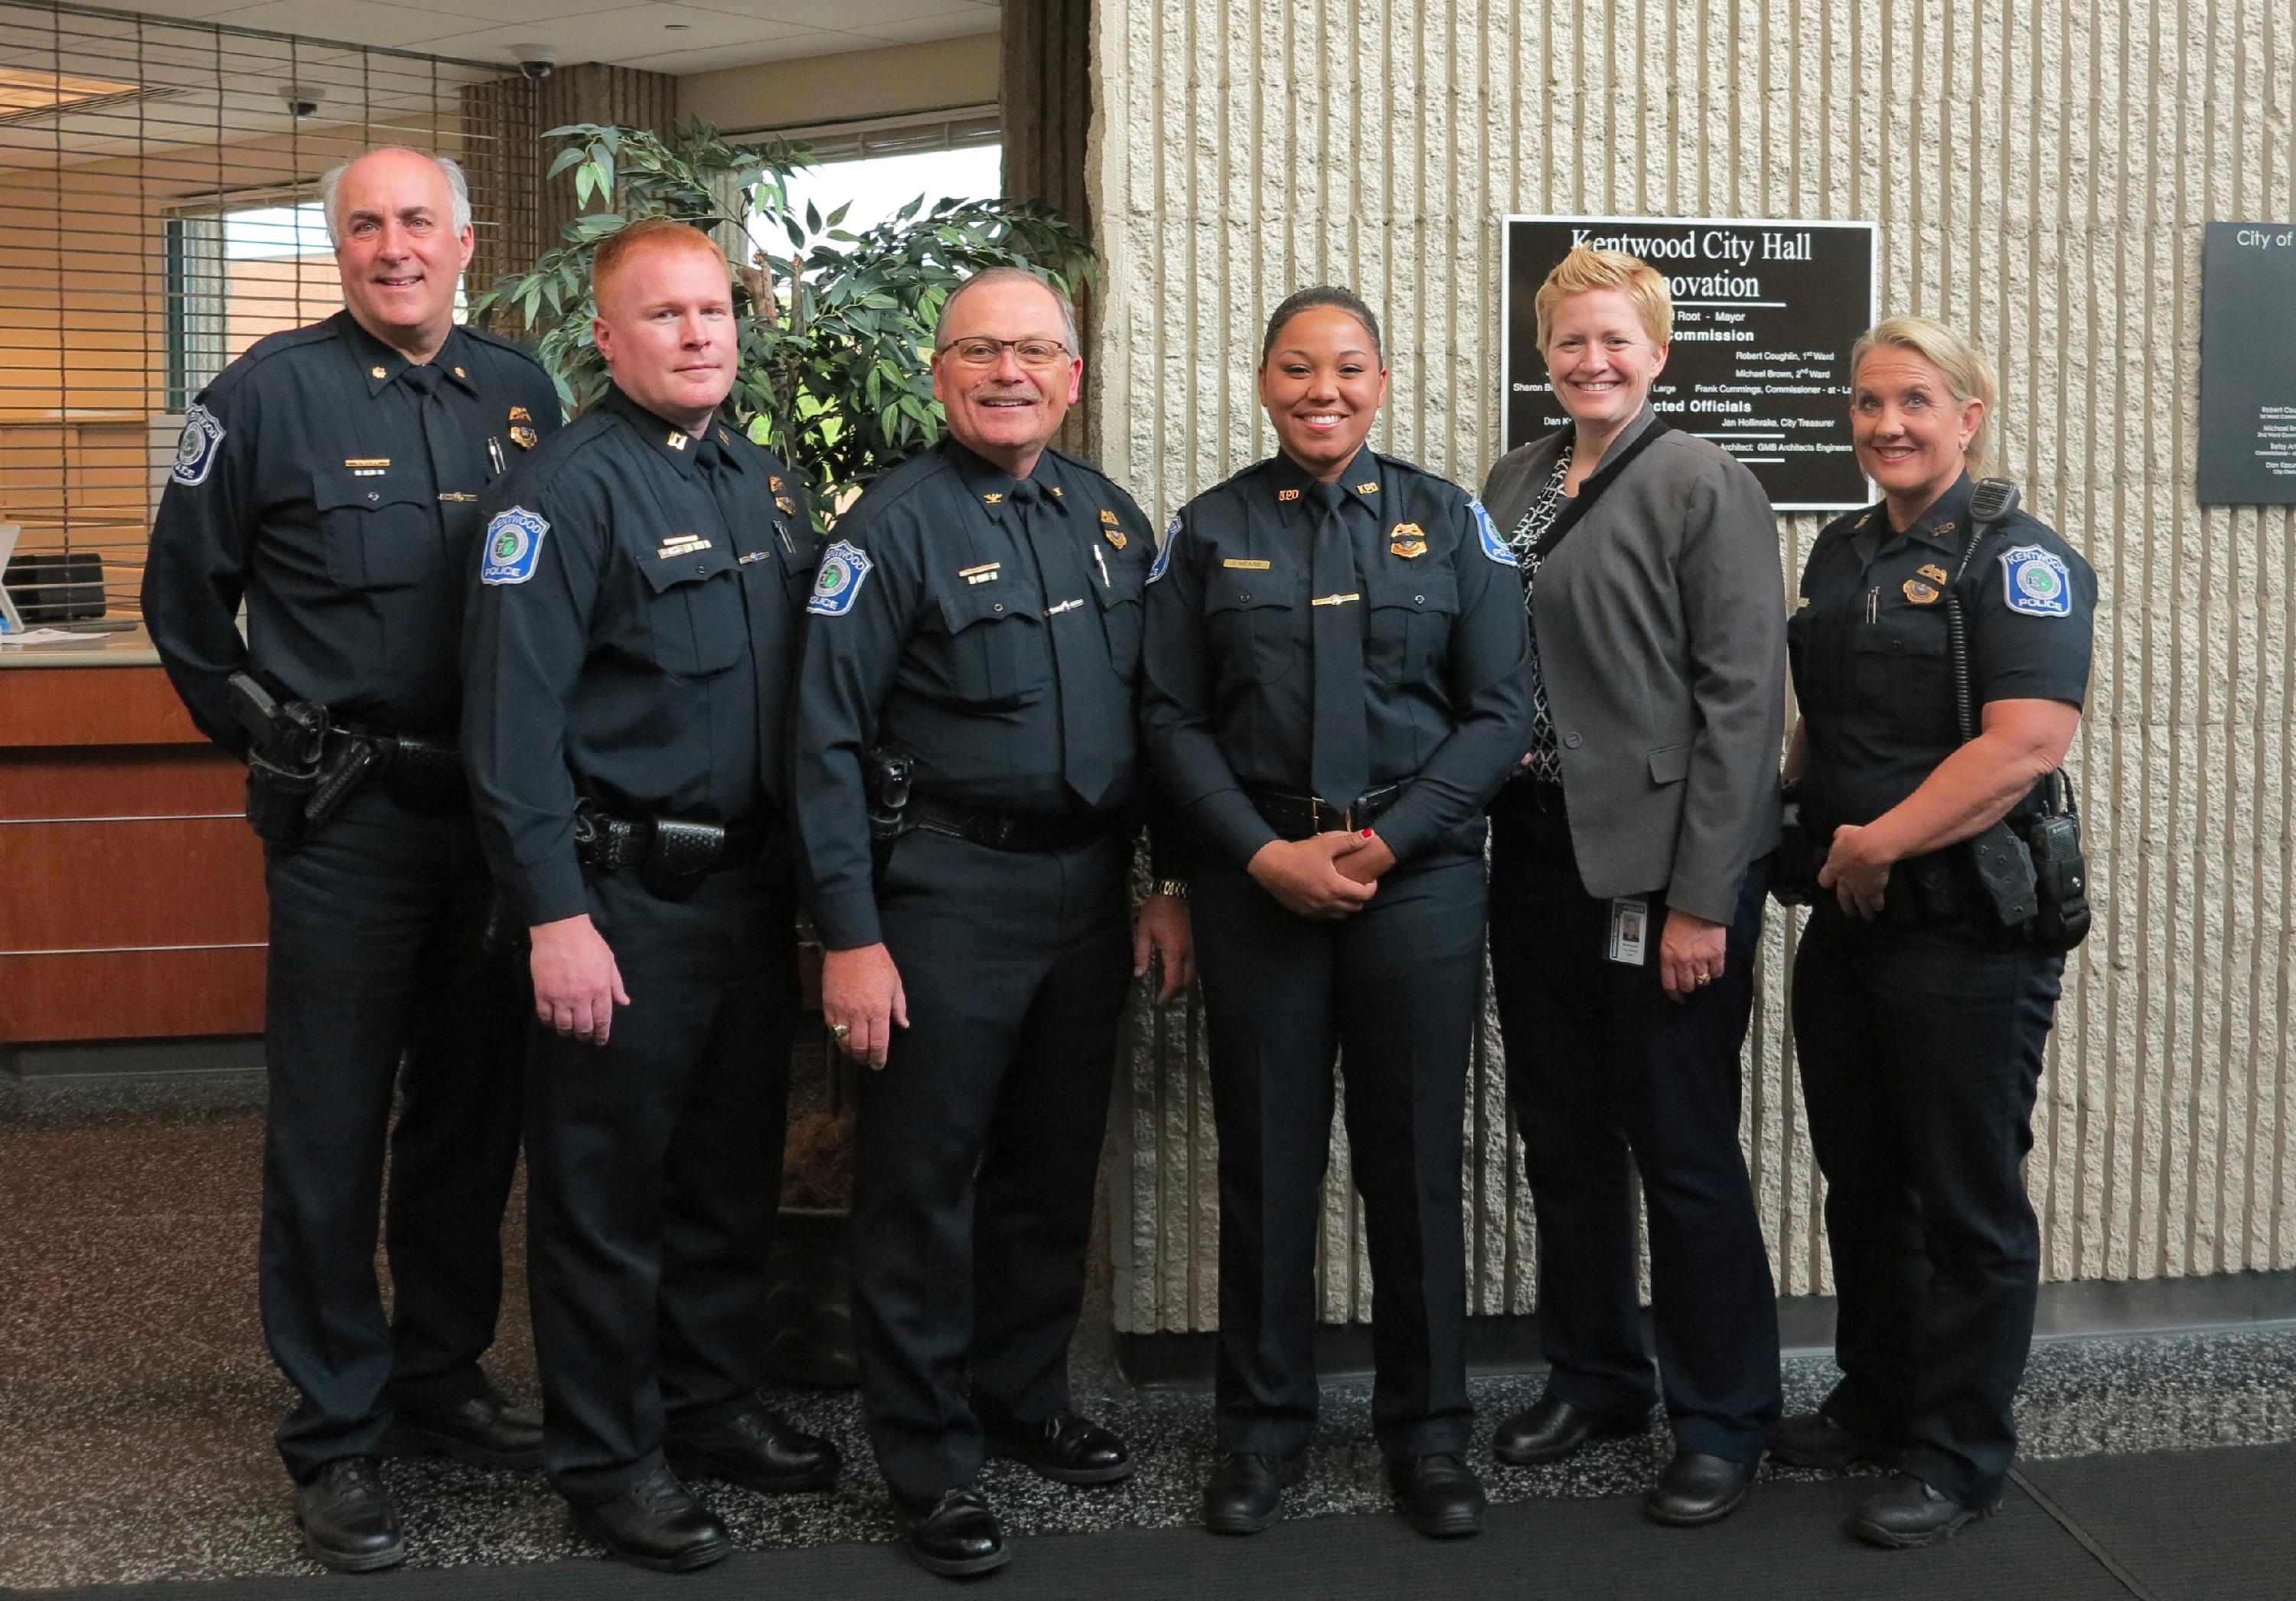 DC Roberts, Capt. Litwin, Chief Hillen, Officer Heard, Captain Morningstar and Officer Clark stand together and smile for a photo following Officer Heard's swearing in.